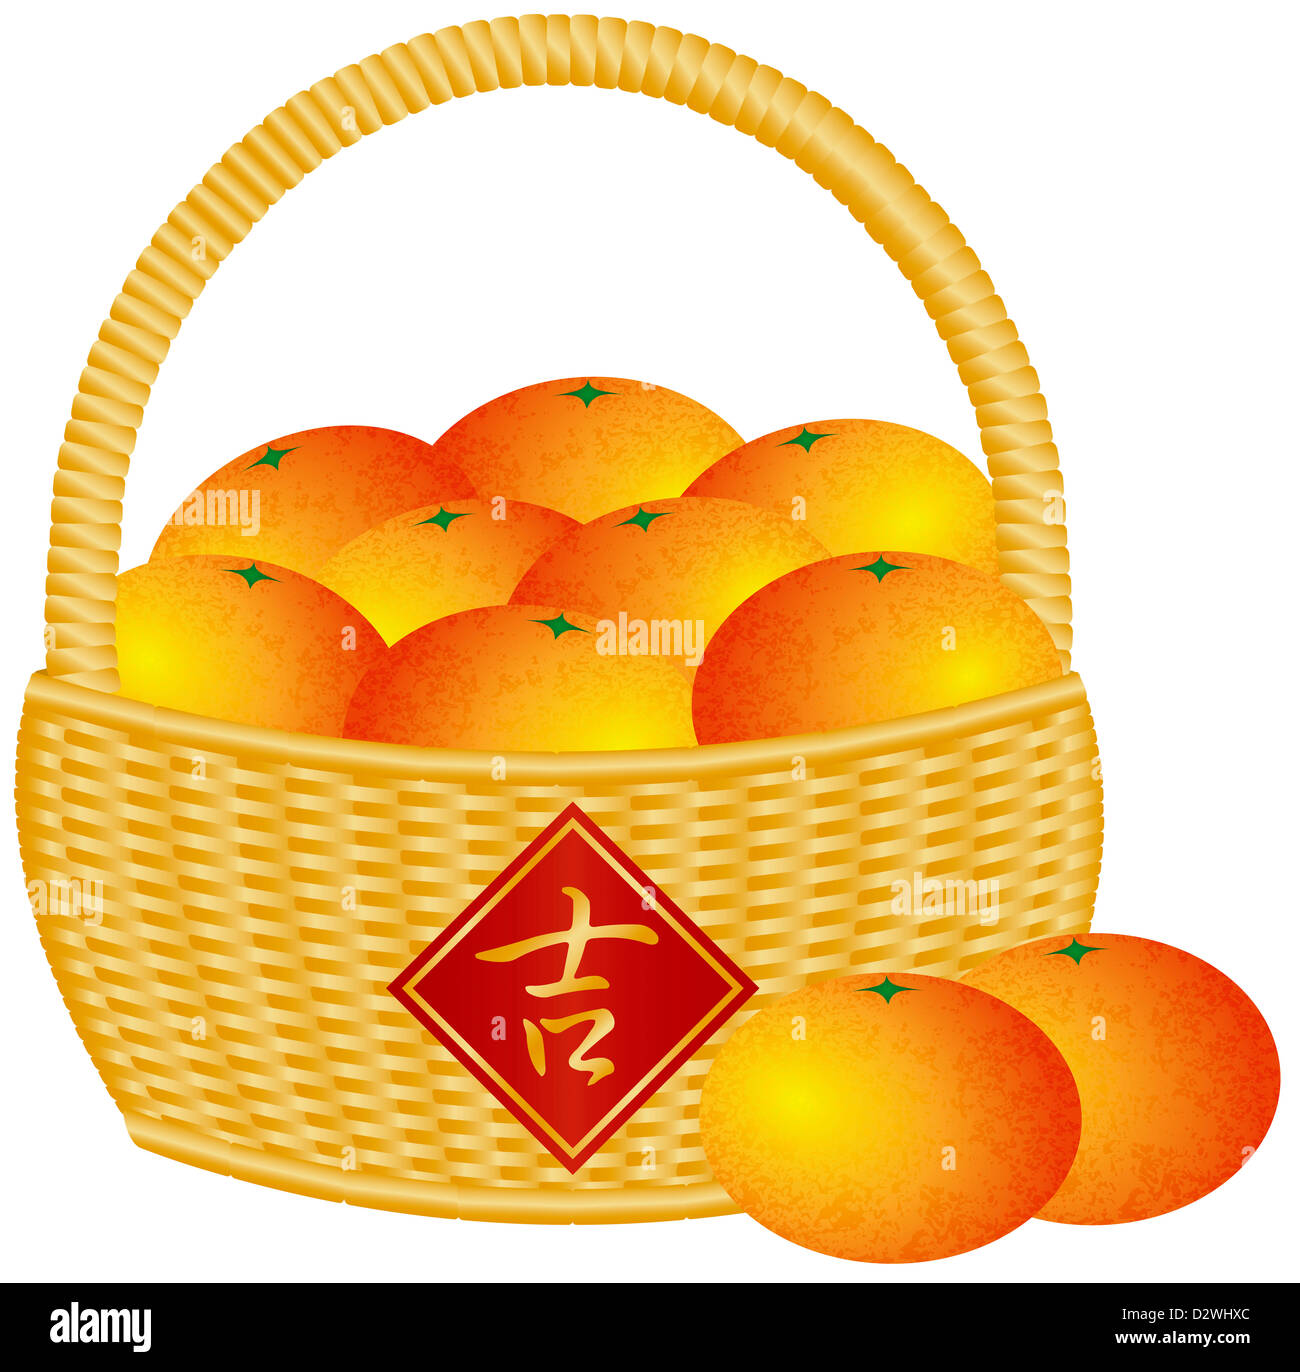 Chinese New Year Basket of Mandarin Oranges with Good Fortune Text Symbol on Sign Isolated on White Background Illustration Stock Photo